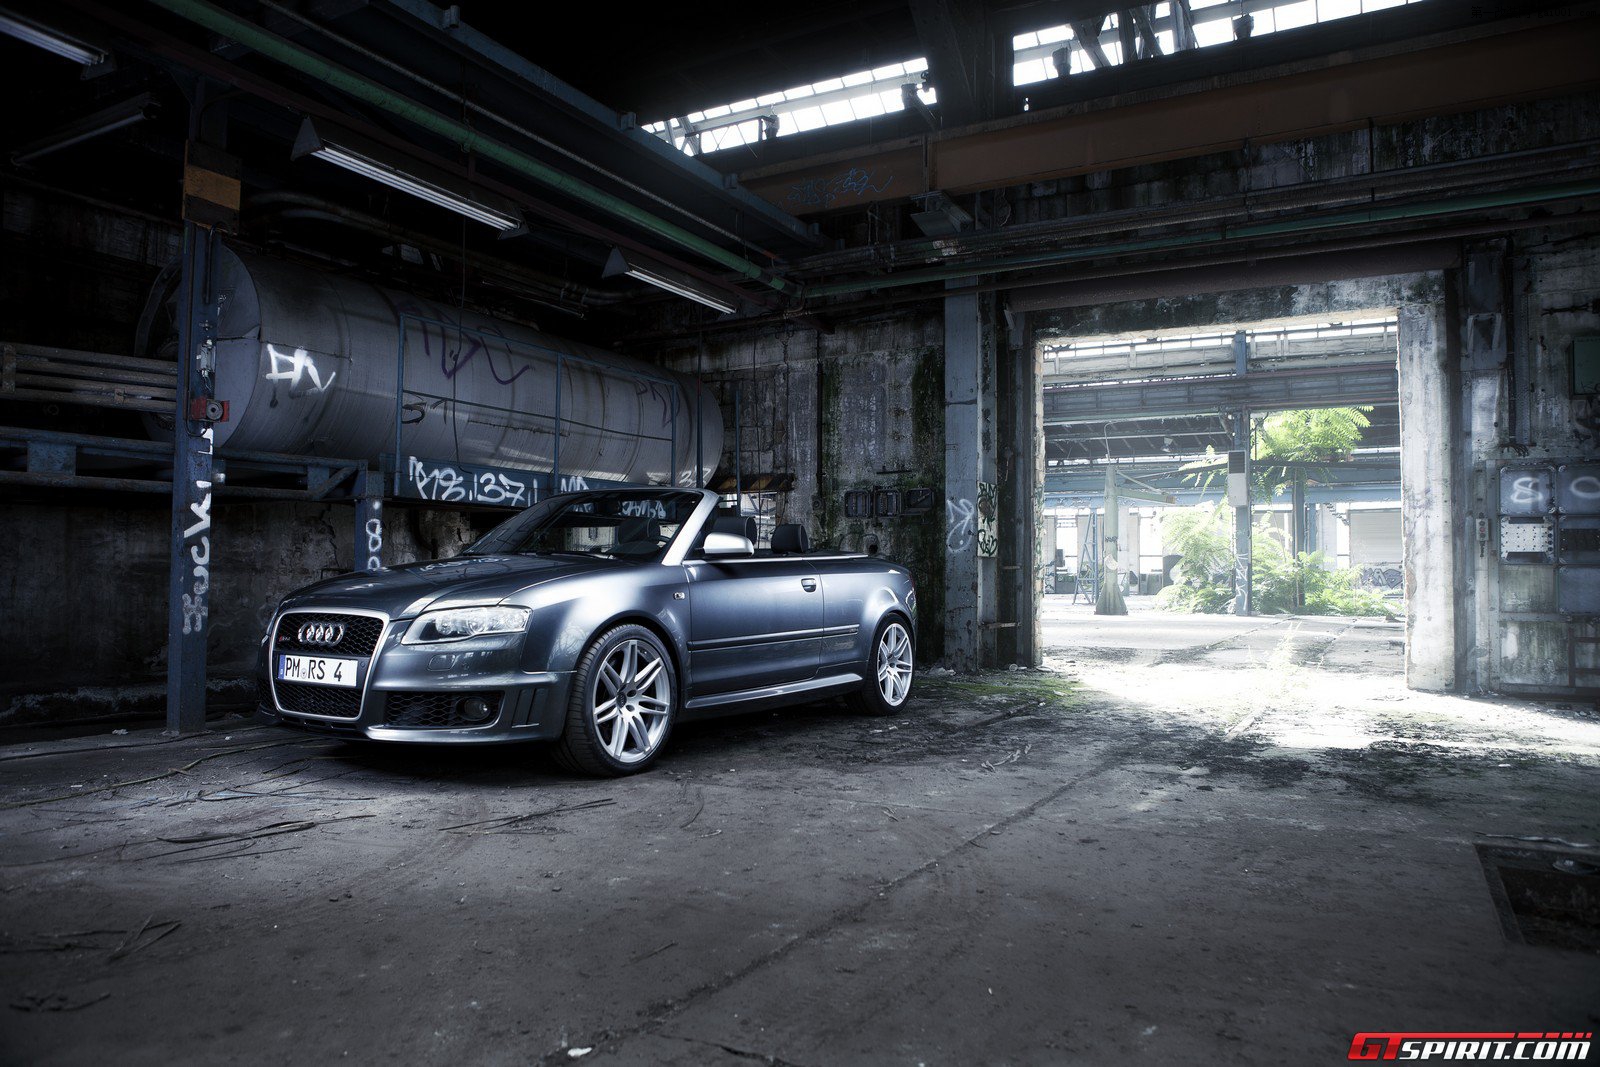 audi-rs4-convertible-with-mtm-exhaust-system-014.jpg